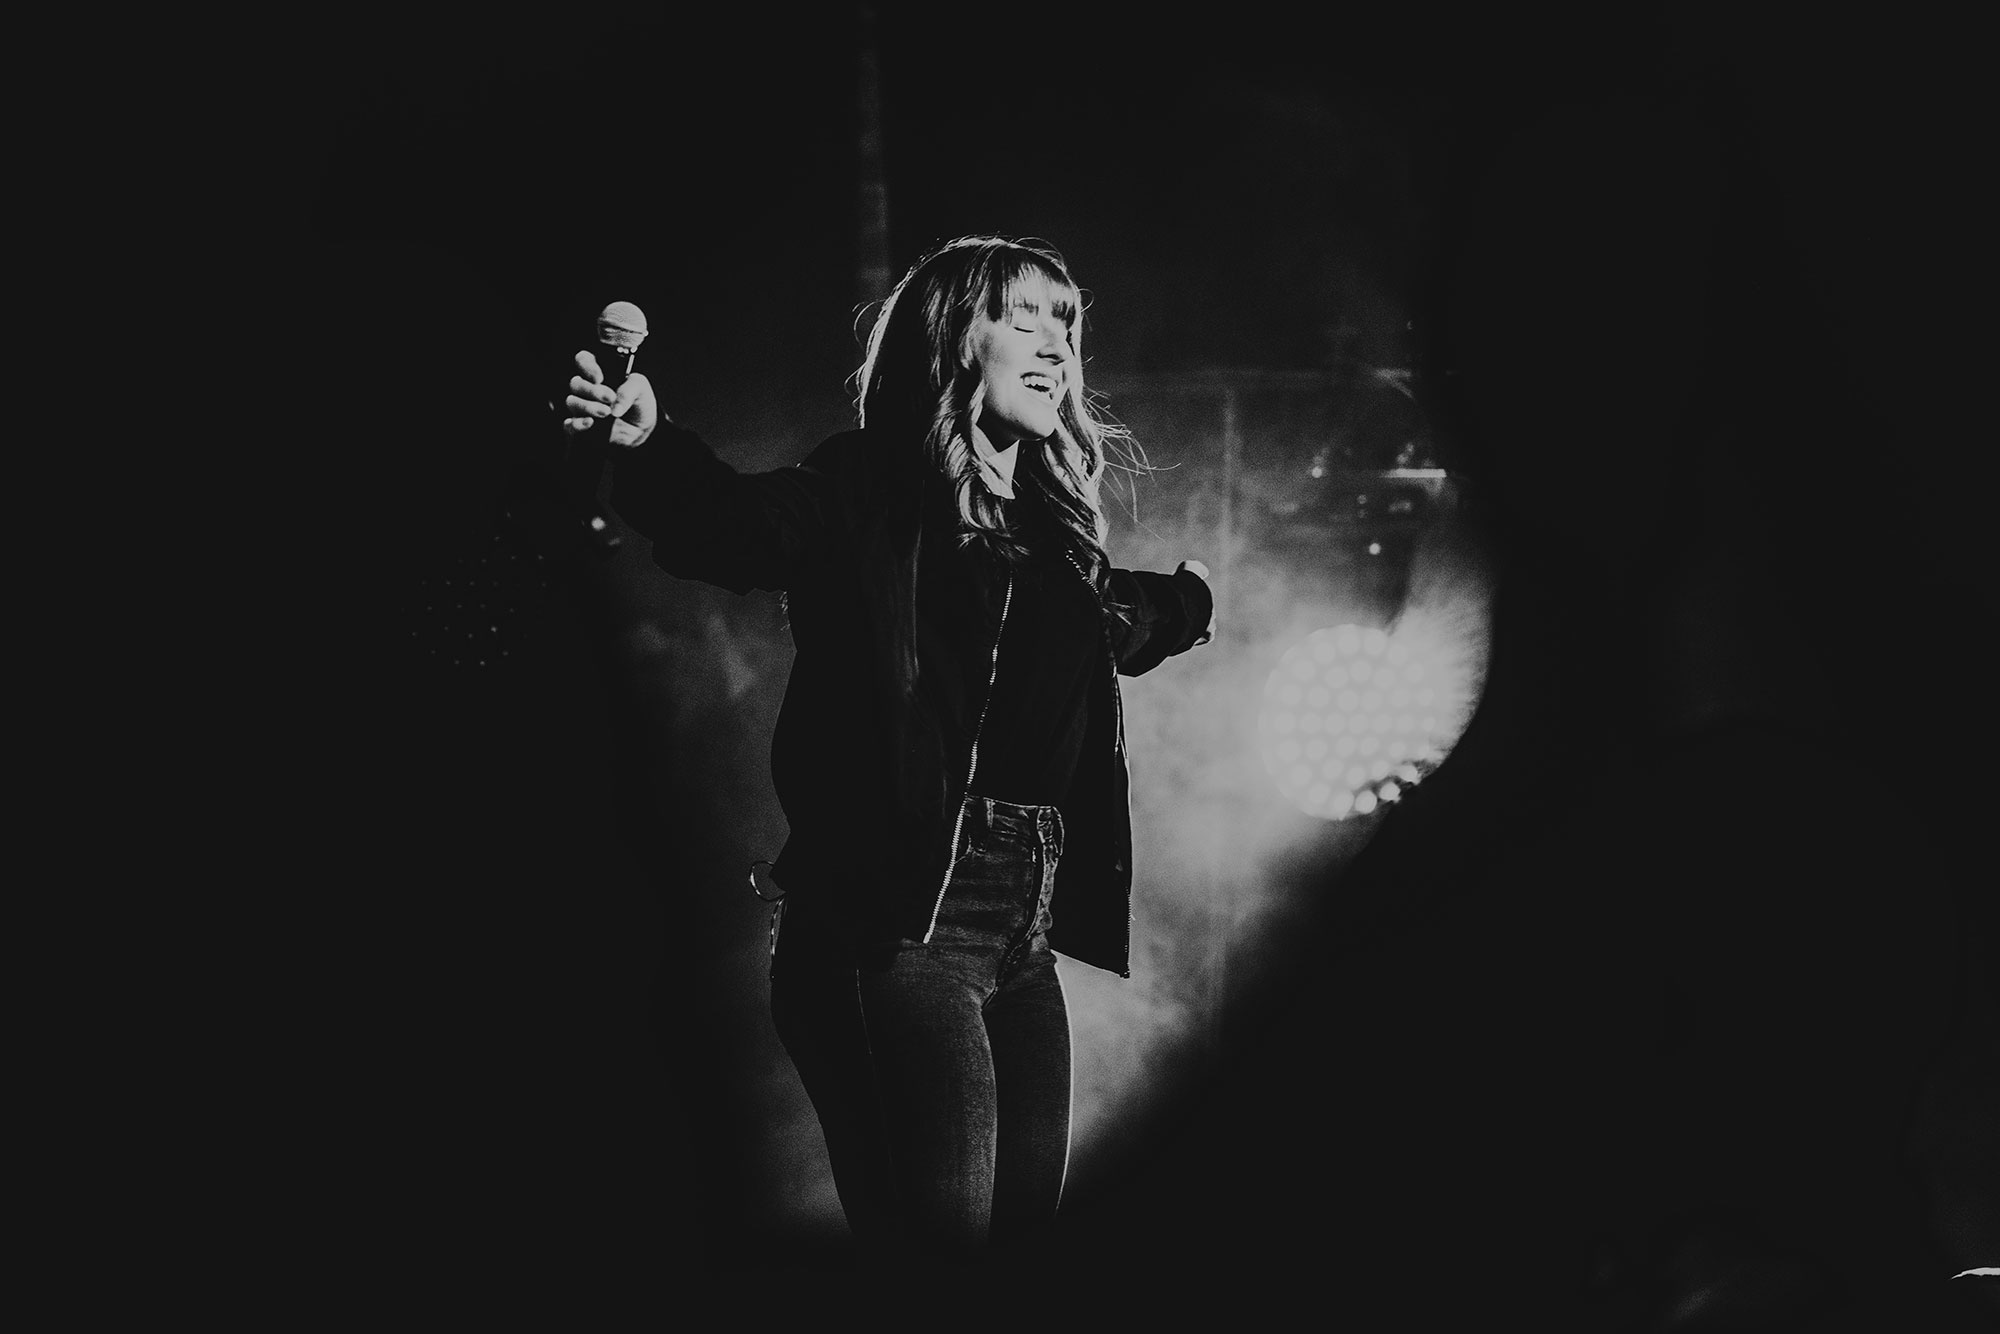 Woman on stage with microphone in outstretch arm in front of a fog machine and lights